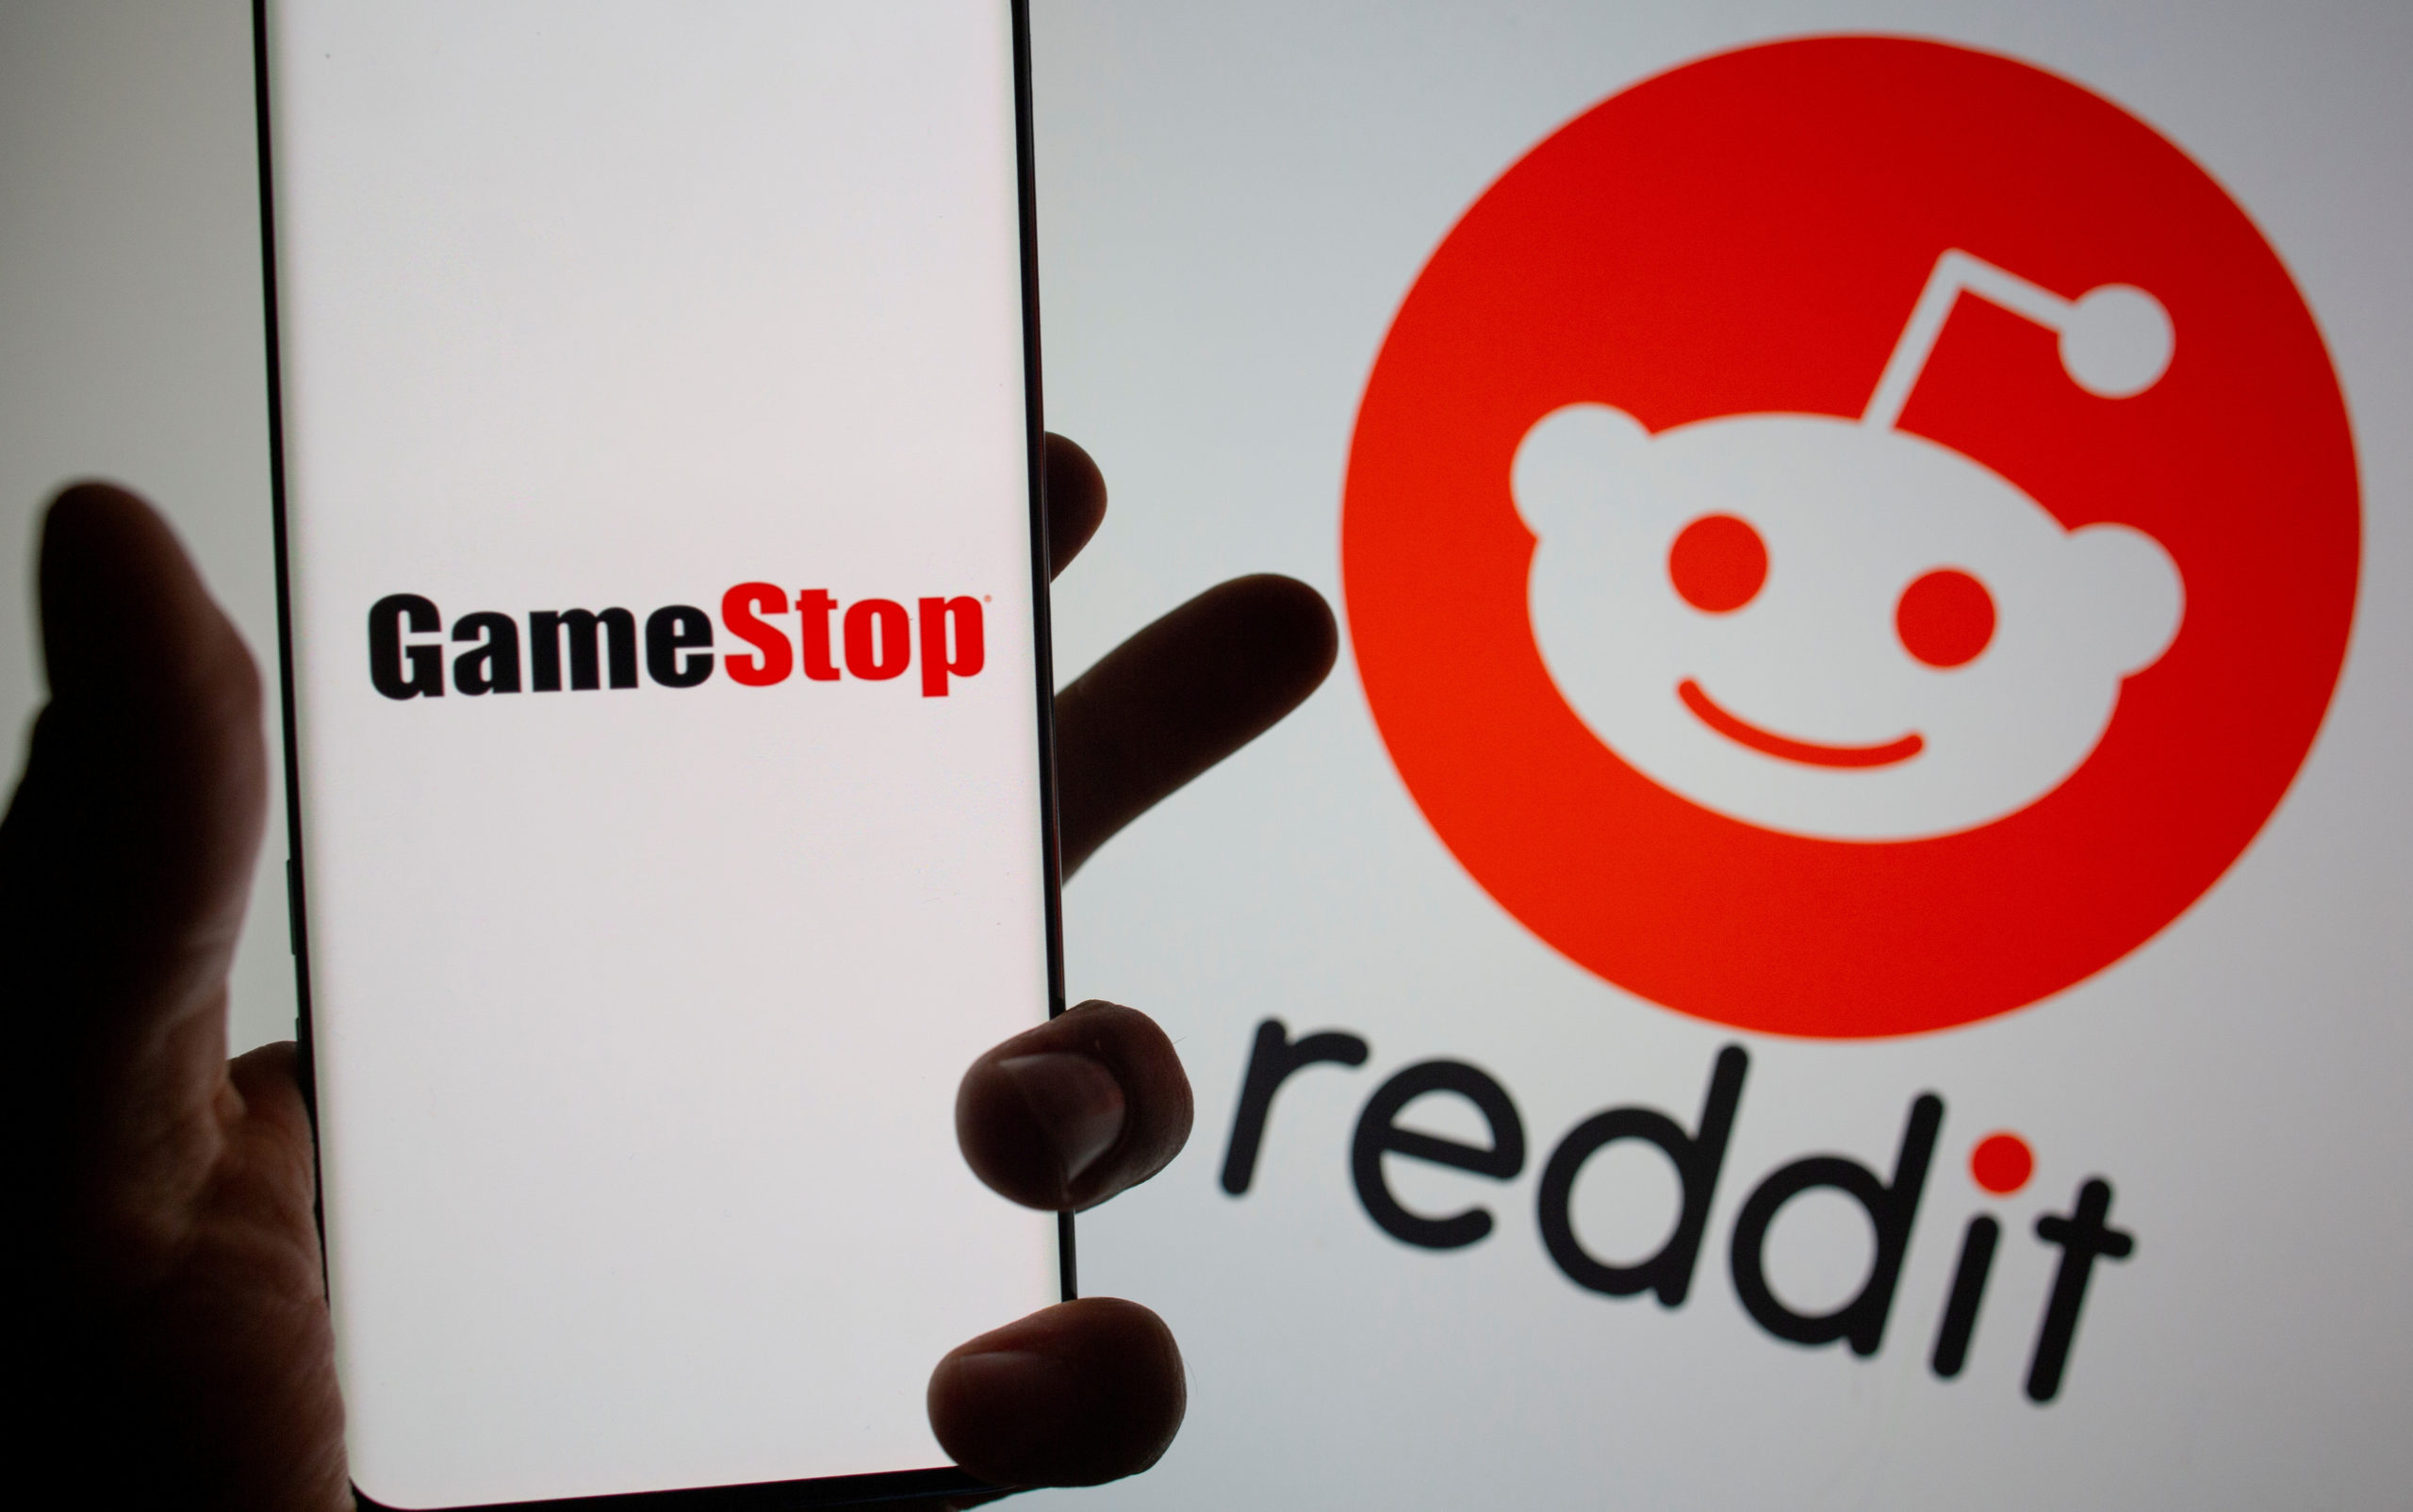 'To the moon' or to a lawyer, GameStop investors cope with stock's rollercoaster By Krystal Hu NEW YORK (Reuters) - Eric Diaz, an operations manager in Tampa, Florida, remains committed to his GameStop shares even after their steep retreat from highs they hit last week. "It got personal," he said. Like many other people, Diaz first invested $3,000 after reading about the video game retailer's stock on the popular Reddit forum WallStreetBets. The so-called "Reddit rally" to squeeze shortsellers rocketed GameStop Corp shares from below $18 a share in early January to as high as $483 last week. Diaz sold some to take profits of $1,500 and hold on to the rest, 10 shares. After watching the shares plunge on Thursday to close at $53.5, Diaz said he plans to buy more if the price keeps dropping. "At first it was investing in an idea," said Diaz. "But then after all the shenanigans when retail investors who wanted to purchase were prevented from doing it, it got personal. So I'm just going to hold until it plays out." The wild swings of GameStop and other Reddit rally favorites were cast as a David versus Goliath tale of individuals taking on Wall Street hedge funds. With trading volume swelling last week, online broker Robinhood and other investing apps placed restrictions on GameStop and other shares. The fierce rally damaged some hedge funds when they could not cover short positions. Still, many people on Wall Street have also made money off GameStop, while some small investors were hurt by its rapid decline. Many financial professionals had warned the rally could not last forever. Still, lawyers said their phones have been ringing with GameStop shareholders hoping to recoup losses. Even during this week's swoon, many recent Reddit posts pledged to hold GameStop until the stock goes "to the moon." "IF HE'S STILL IN, I'M STILL IN" Those who were late to the party are likely looking at losses, if they did not hedge their long positions somehow. John Gjolaj, a restaurant manager in New York and longtime user of Reddit's WallStreetBets forum, invested in over 300 shares of GameStop last week at $269 a share. He plans to hold on. Gjolaj said he believed GameStop's team can turn around the company. "I’m hoping I can sell it at $500 or so. But if it takes years, I’ll be holding," Gjolaj said. "I invested in bitcoin at its height in 2017. I can stomach all this volatility." Jerry Corley, a gardener in Arkansas, joined WallStreetBets' thread on Reddit last week and bought three shares of GameStop on Monday. Looking at a loss, he has drawn encouragement from Roaring Kitty, the online handle of an investor who championed GameStop and whose posts claimed he turned an investment of a few thousand dollars into millions. "He has got his money where his mouth is. This guy's no dummy. That's a great sign right there," said Corley. On Wednesday, Roaring Kitty, also known as DeepF***ingValue on WallStreetBets, posted a screenshot on Twitter of the GameStop stock, which was traded at around $4 in July, adding "I like the stock." Keith Patrick Gill, a trained financial advisor who is behind the Roaring Kitty streams, did not respond to a request for comment. His recent posts show he still holds a position worth over $8 million in the stock. Some followers on Reddit posted after his Wednesday tweet: "If he's still in, I'm still in." CALLS TO LAWYERS Diaz tried to get around Robinhood's trading restrictions by using several trading platforms. But the trading limits quickly drew a backlash from investors and U.S. lawmakers from both parties, and have also sparked lawsuits. Levin Papantonio Rafferty attorney Michael Bixby said his firm has gotten dozens of calls with "every sort of complaint you could imagine" related to Robinhood's handling of GameStop trading. "If you lost $10,000, that might be a heck of a lot of money to the individual but it would be difficult to justify the cost of litigation," Bixby said. A representative for Robinhood declined comment on the lawsuits. Previously, the online broker said the trading restrictions were put in place to because of the collateral it needs to post required by clearinghouses to backstop many of the trades. Matthew Schwartz, attorney at Kass Shuler in Florida, said most of the calls he received were from individuals trading options that could not buy, or who had traditional equities that were restricted. The Reddit rally also had winners that remain in play. Bryan Towey, a 20-year-old entrepreneur in New York, said he made over 890% returns on GameStop since he invested in 10,000 shares at an average cost of $22.10 per share in early January after reading about the company's e-commerce sales growth. Towey has gradually sold his holdings since it hit $165, but still owns 2,200 shares, in the hope for another breakout. "I’m like a gut investor type of person," Towey said. "I have a good feeling about the business. If there is another bubble, I'll probably get rid of it." (Additional reporting by Ross Kerber, Suzanne Barlyn and Megan Davies, Writing by Megan Davies; Editing by David Gregorio)